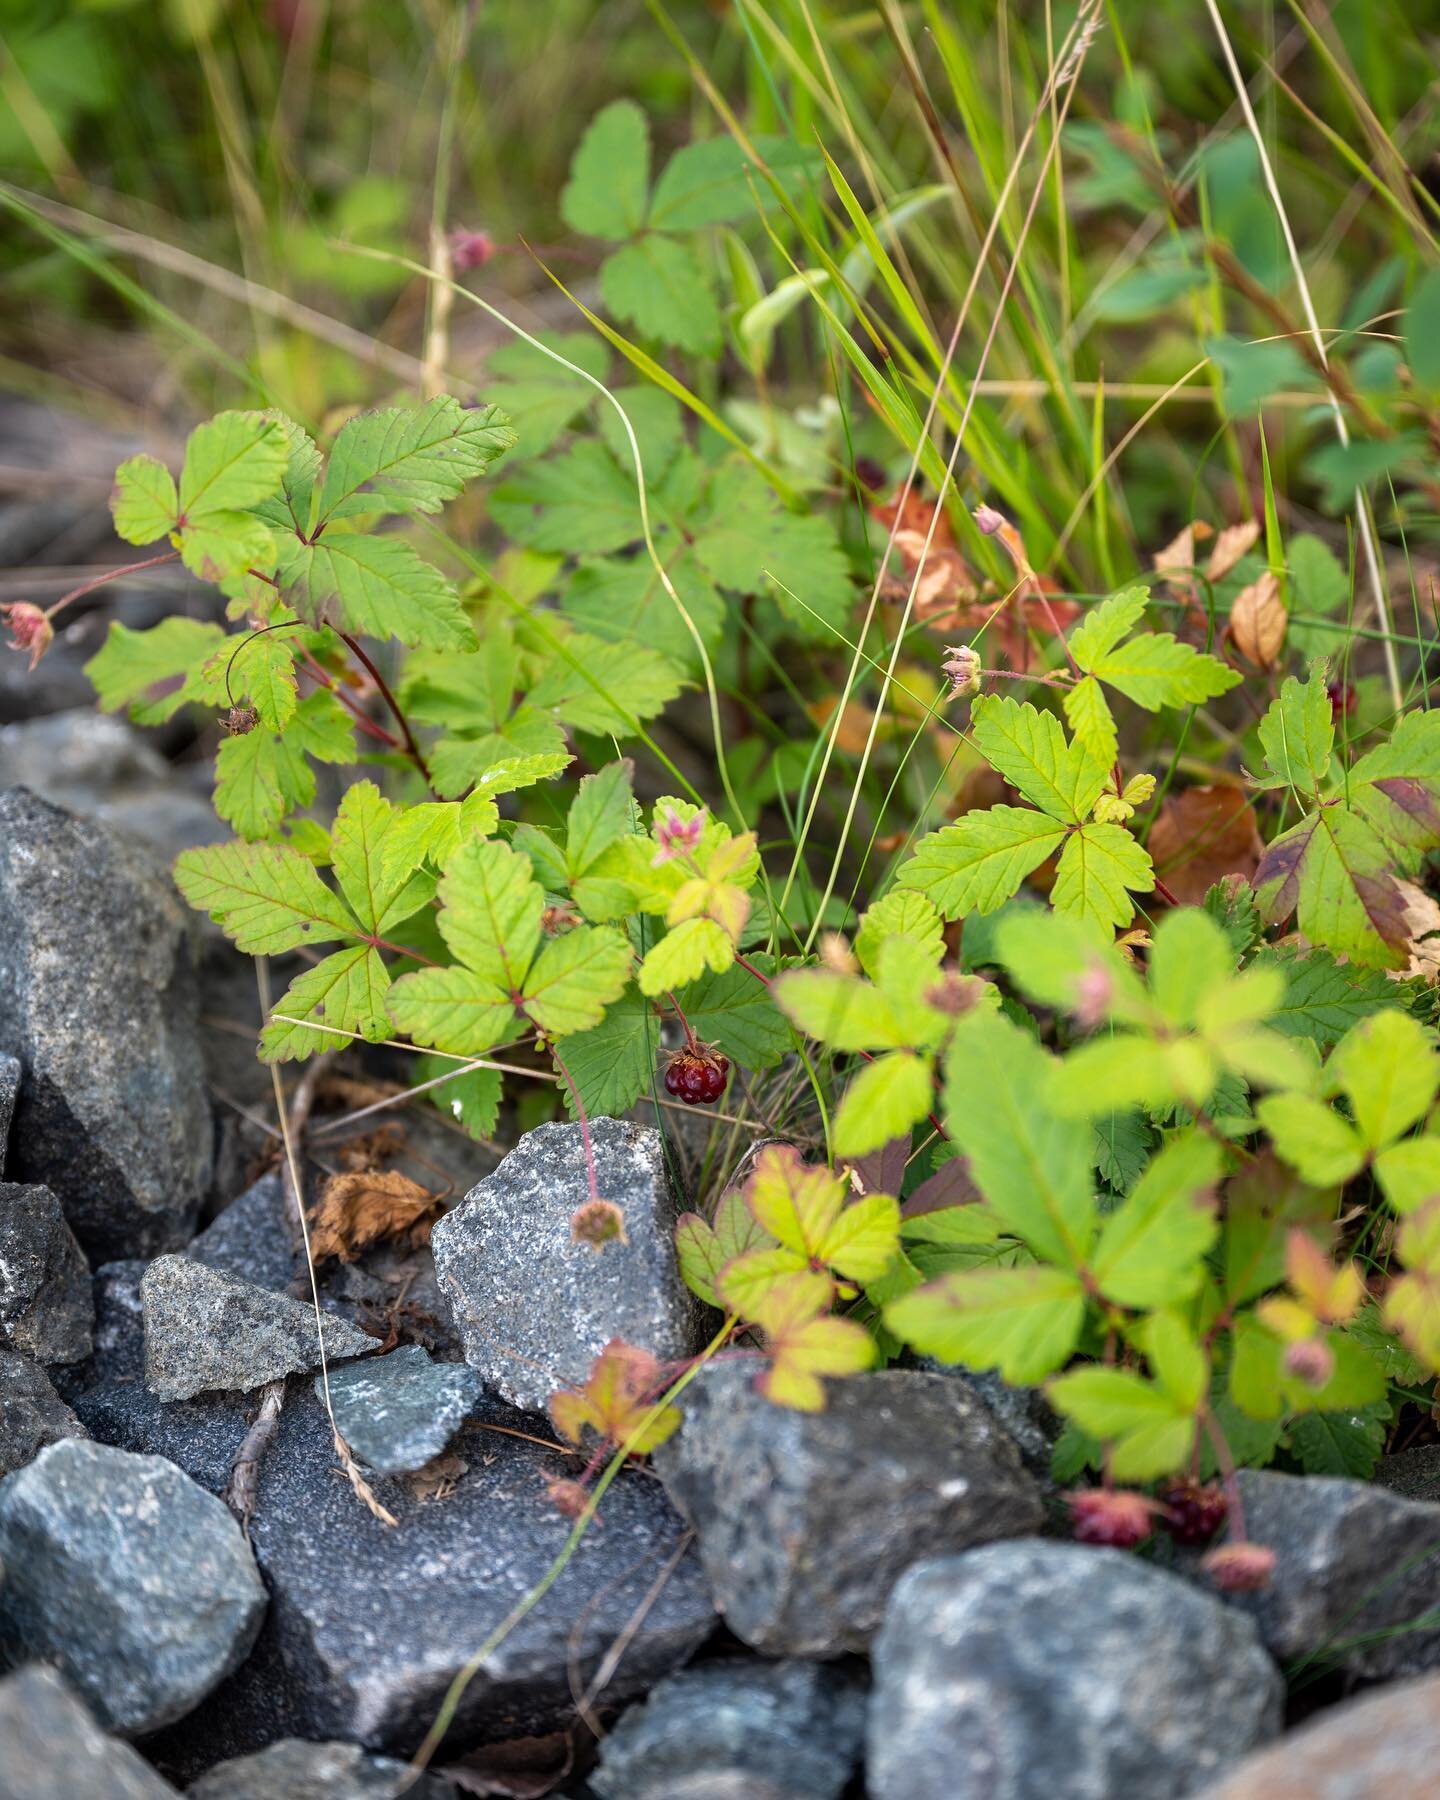 Ute p&aring; jakt efter &aring;kerb&auml;r 💜 Verkar vara lite tidigt, men jag hittade iallafall n&aring;gra mogna b&auml;r. 
. . .
I&rsquo;ve been out searching for Arctic raspberries. 💜 It seems to be a bit early, but I did find some mature berrie